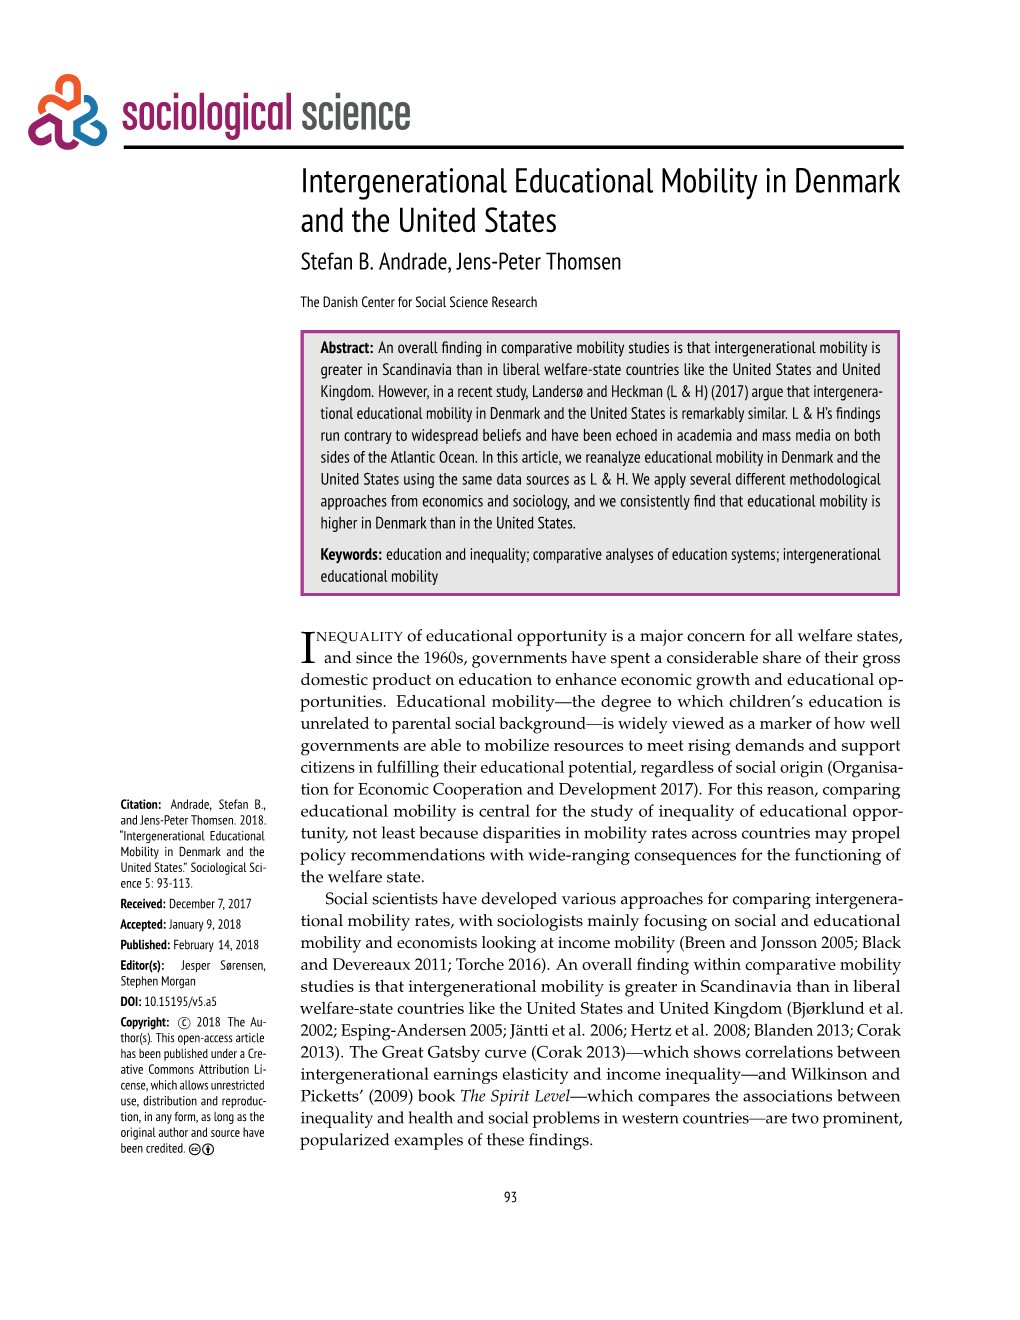 Intergenerational Educational Mobility in Denmark and the United States Stefan B